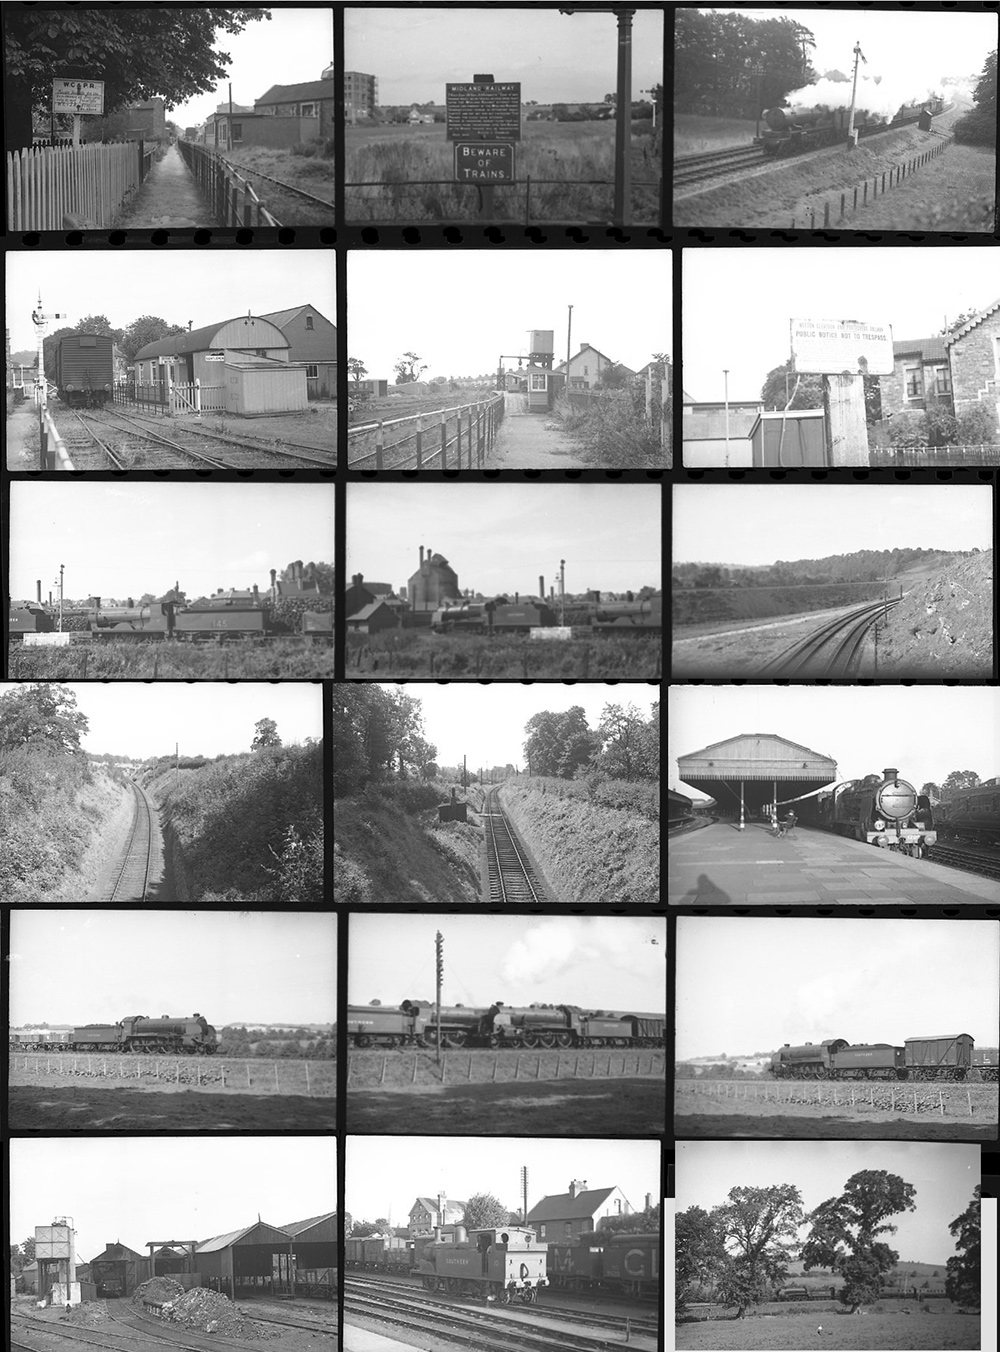 24 35mm negatives. Taken in 1940 location Weston Clevedon & Portishead Railway plus some mixed SR/